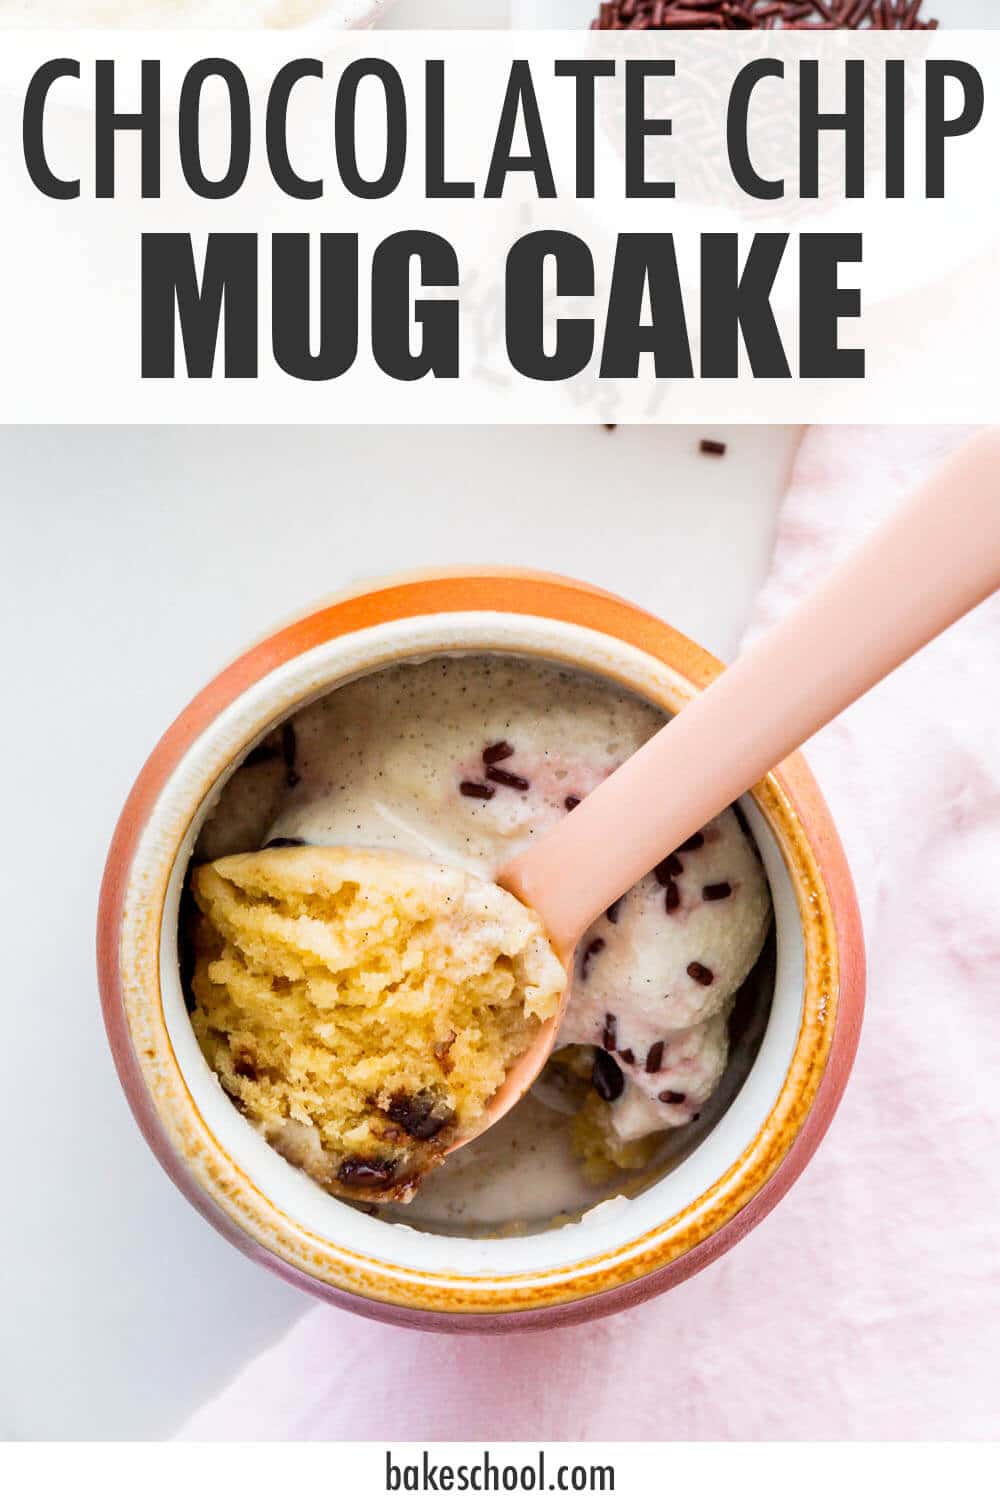 Chocolate chip mug cake cooked directly in a mug and served with ice cream and chocolate sprinkles.